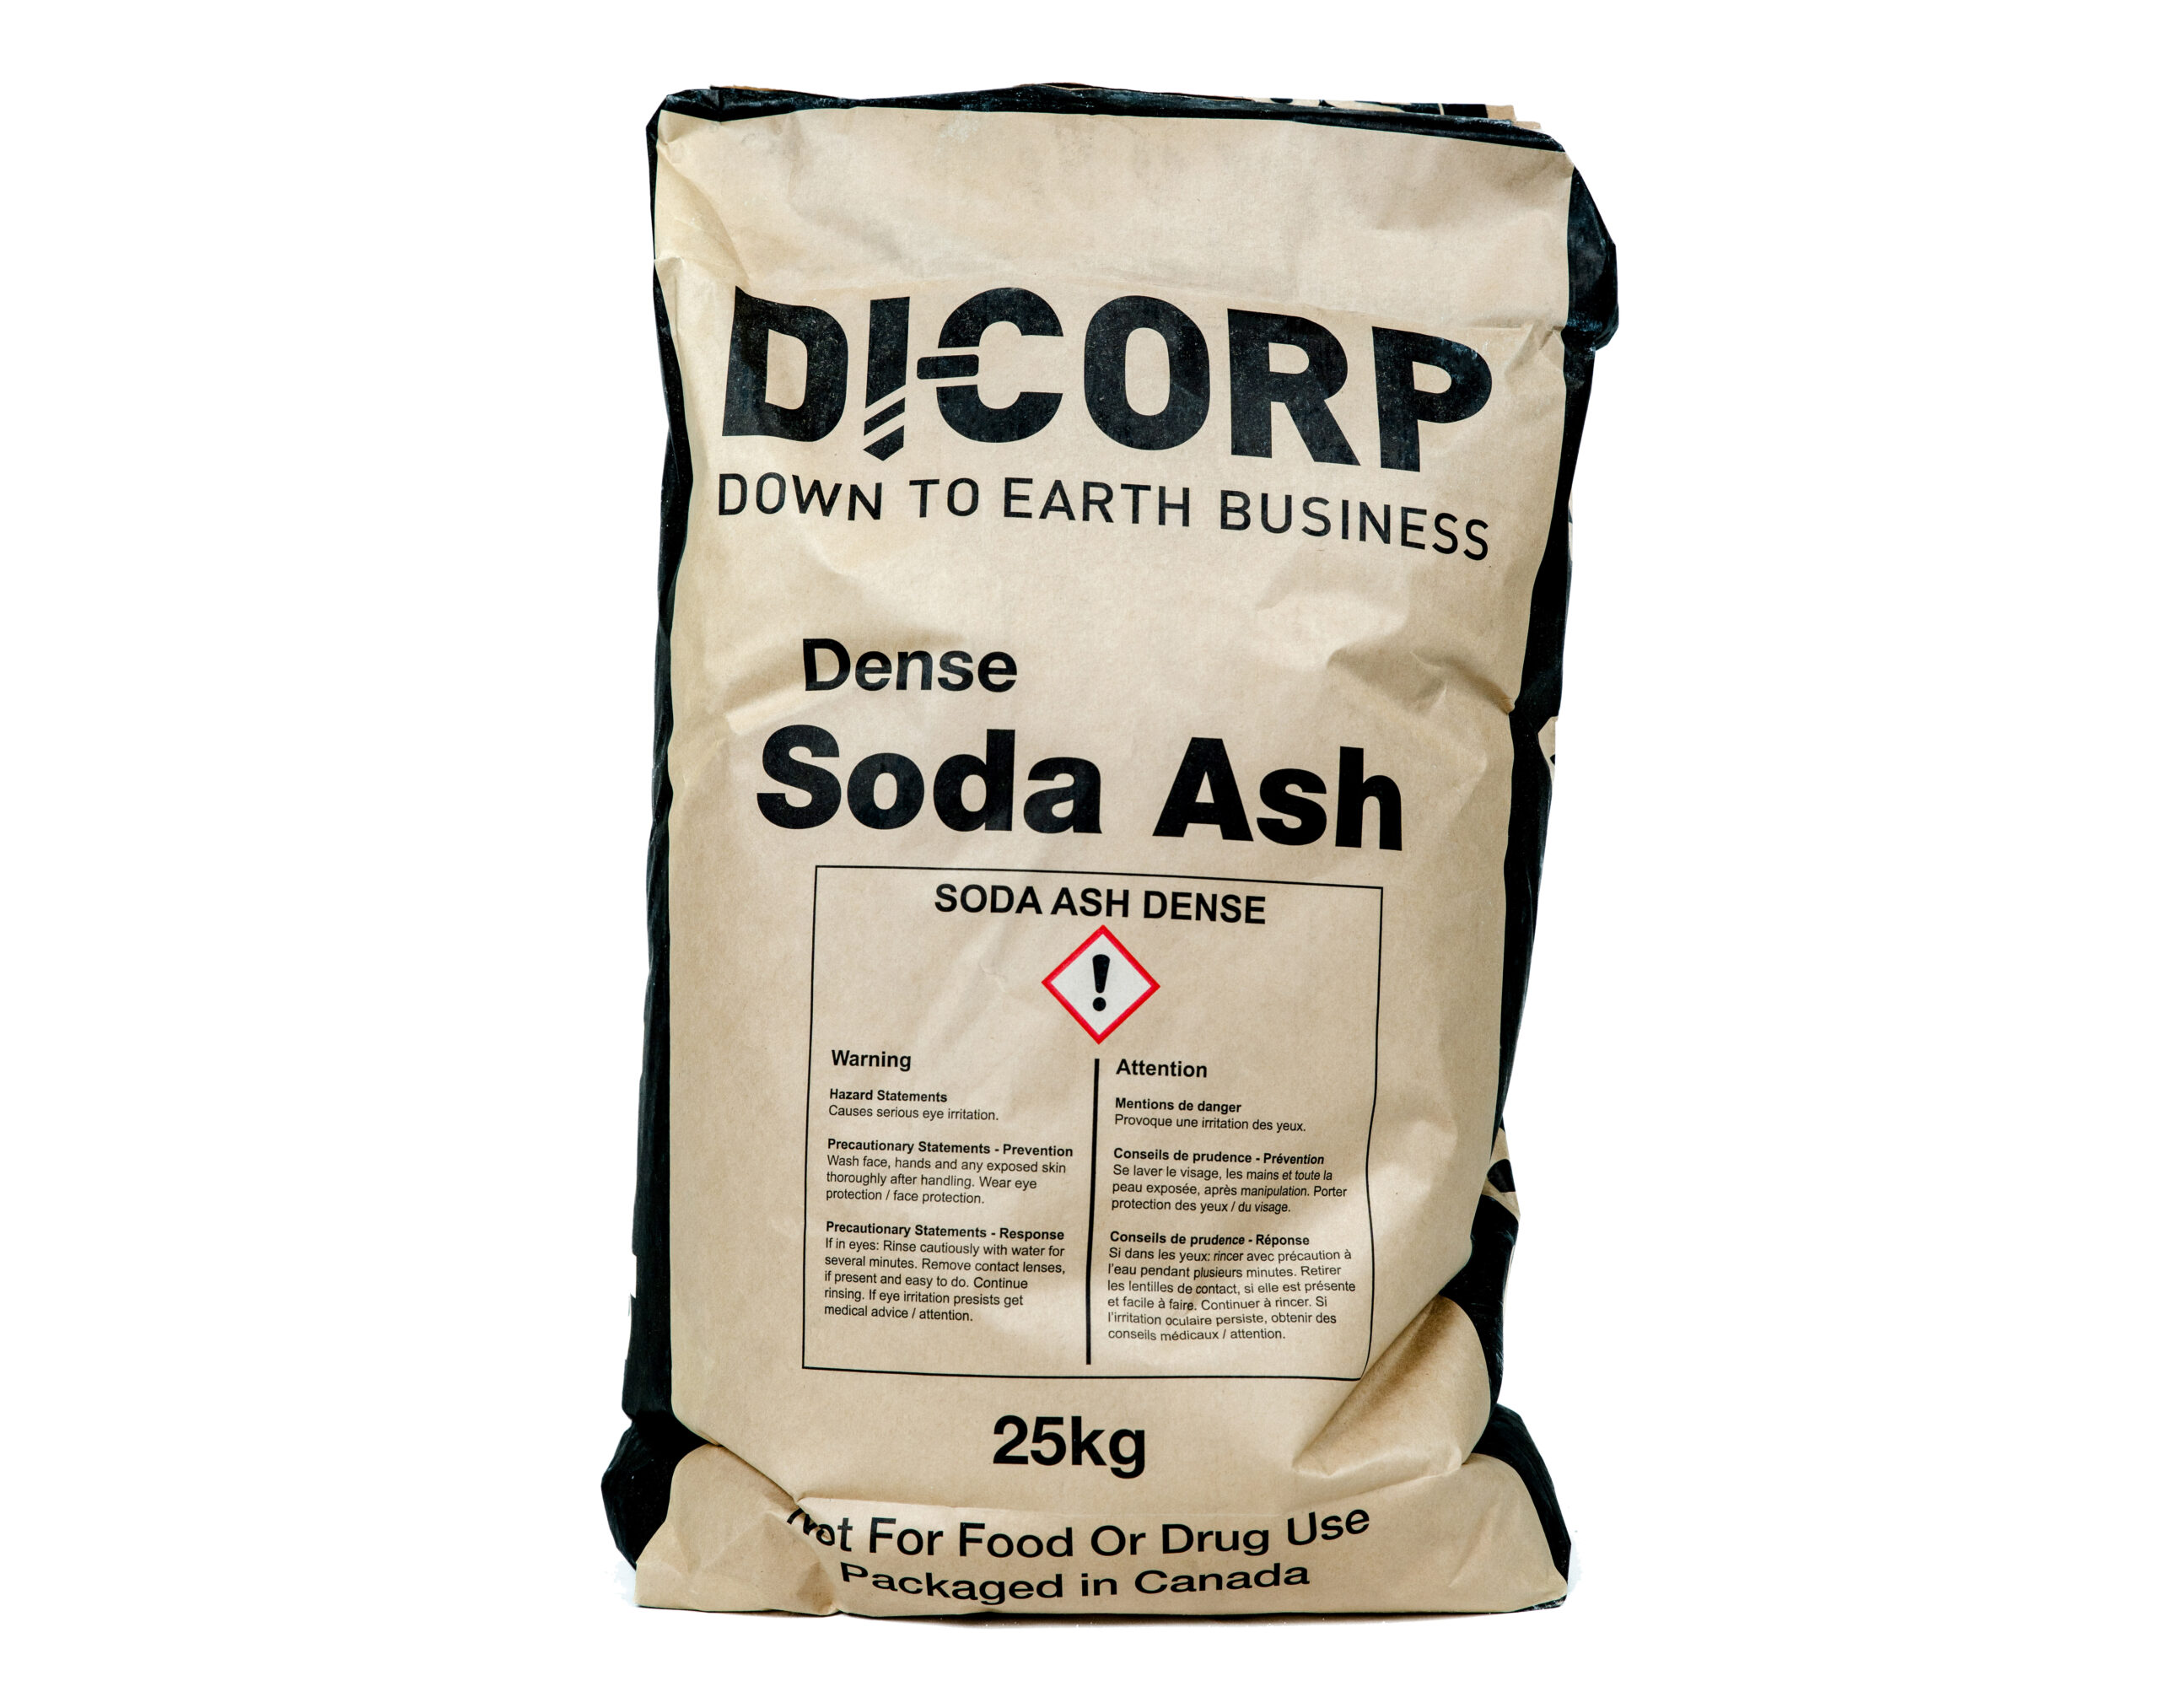 Soda Ash for Cementing - Get a Quote Now